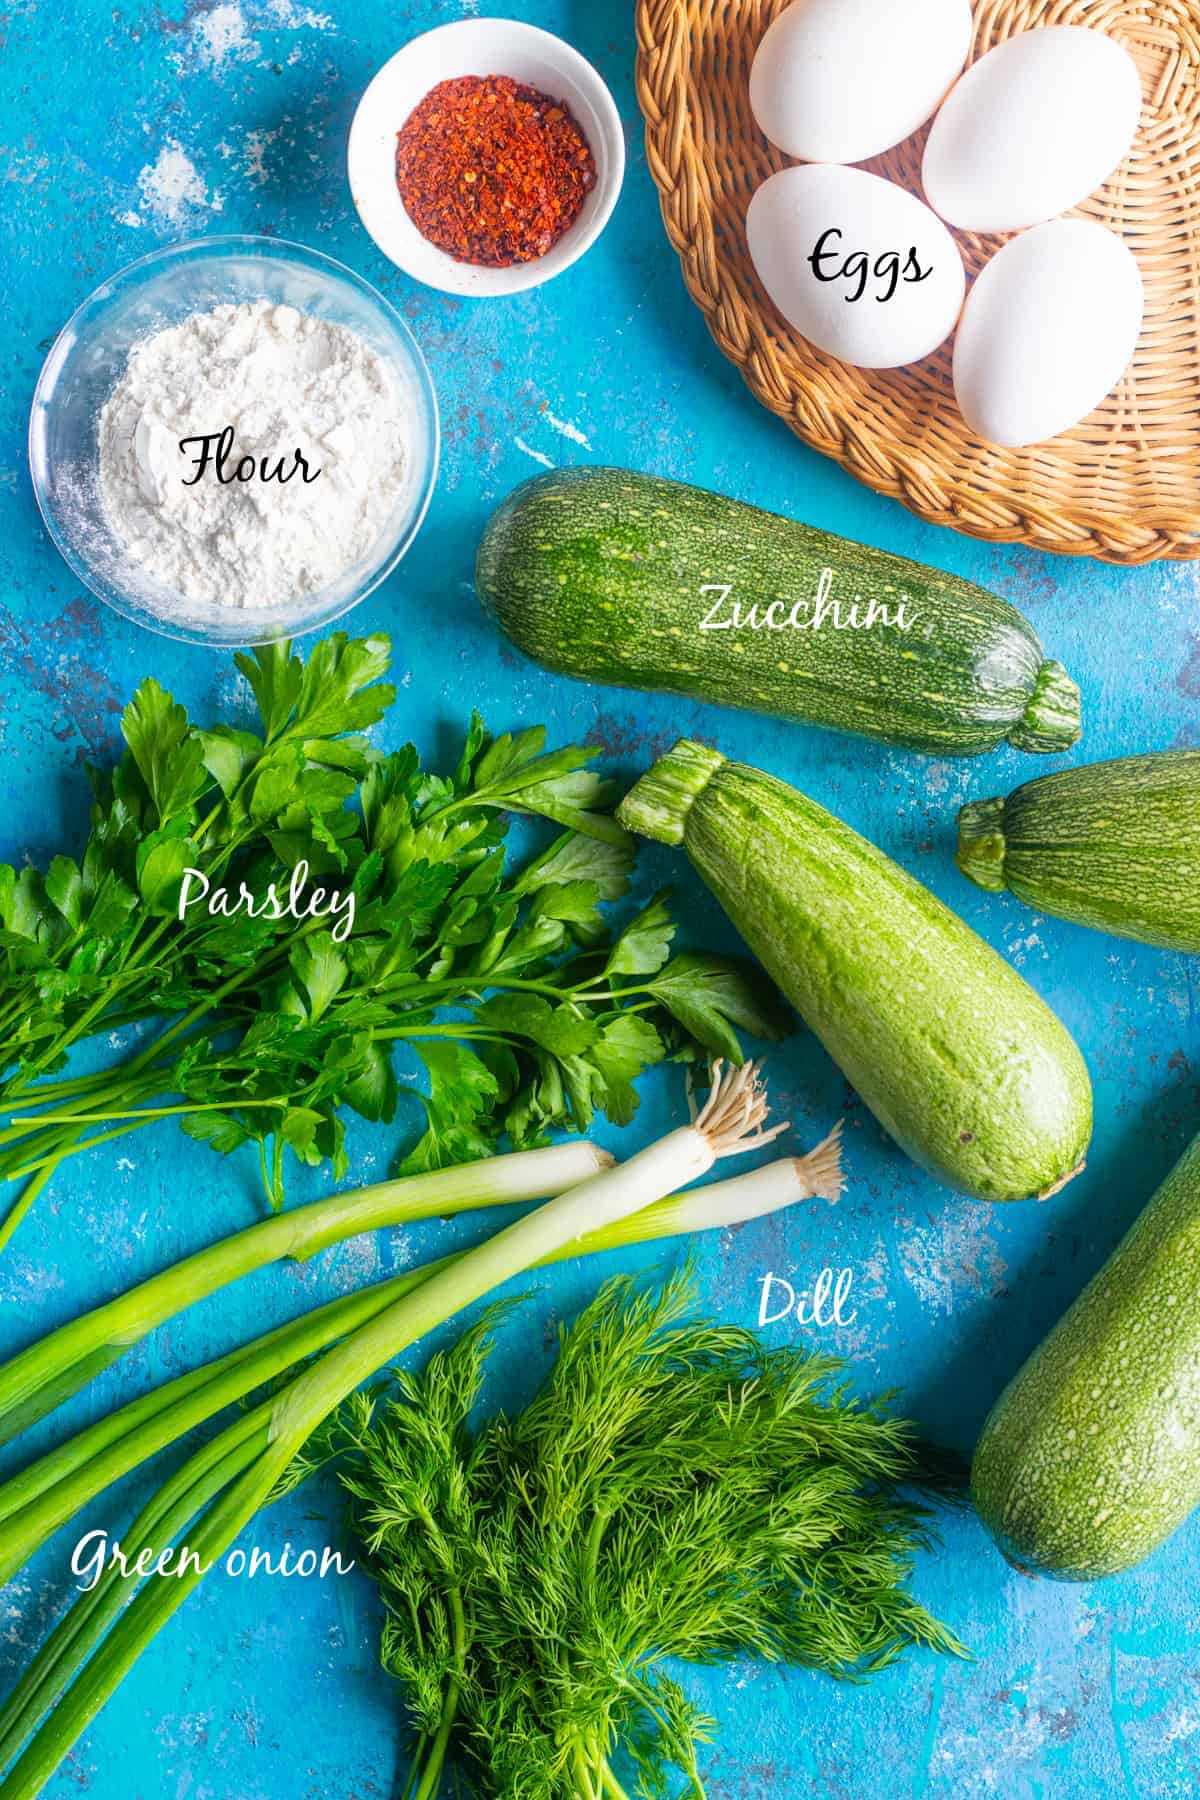 To make zucchini fritters you need zucchinis, green onion, parsley, dill, eggs, flour and Aleppo pepper. 